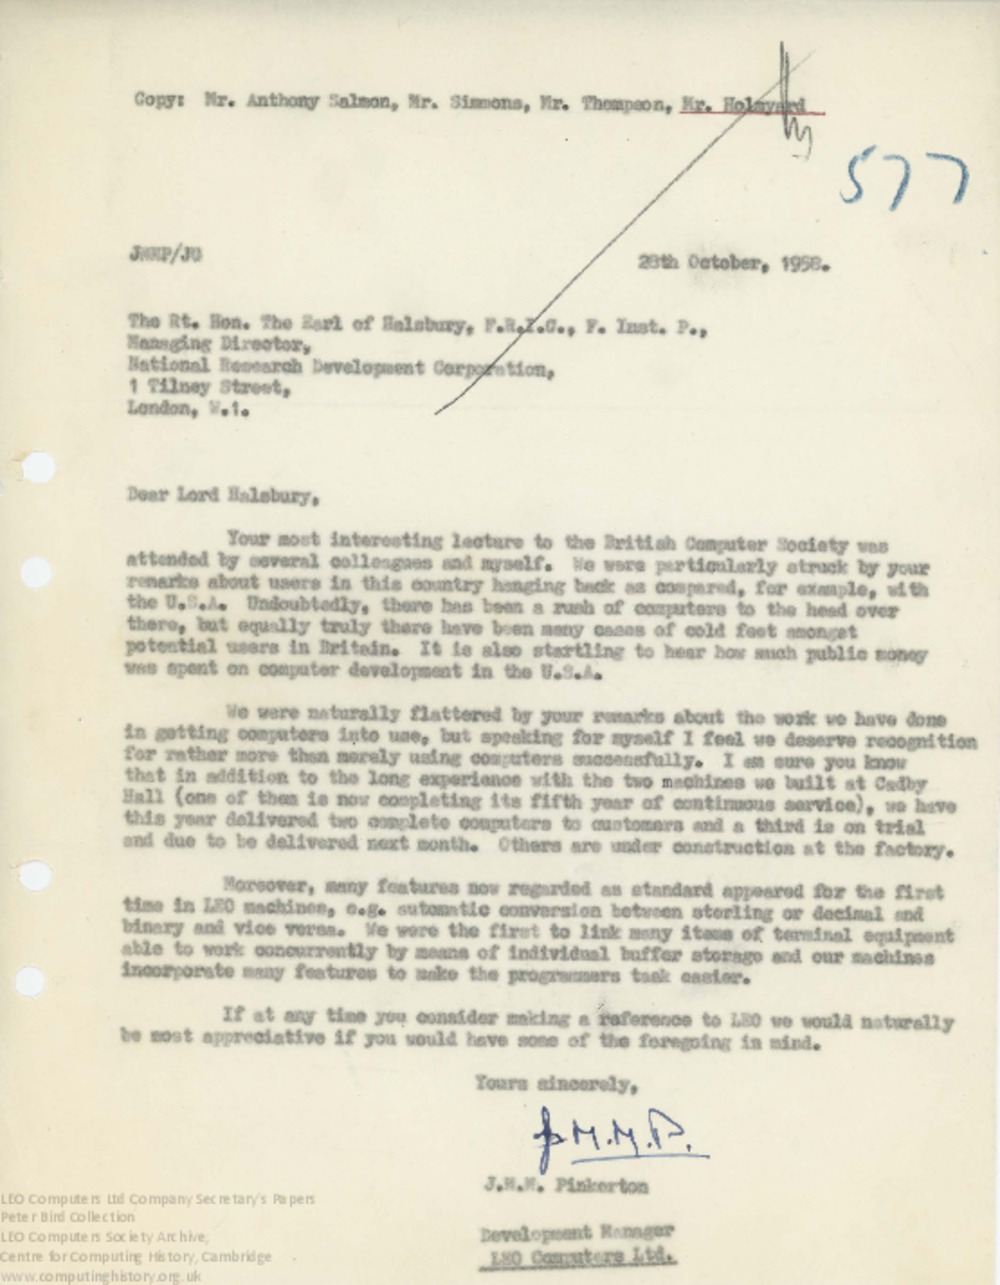 Article: 62453  Correspondence with Lord Halsbury, National Research Development Corporation, 29-30 Oct 1958